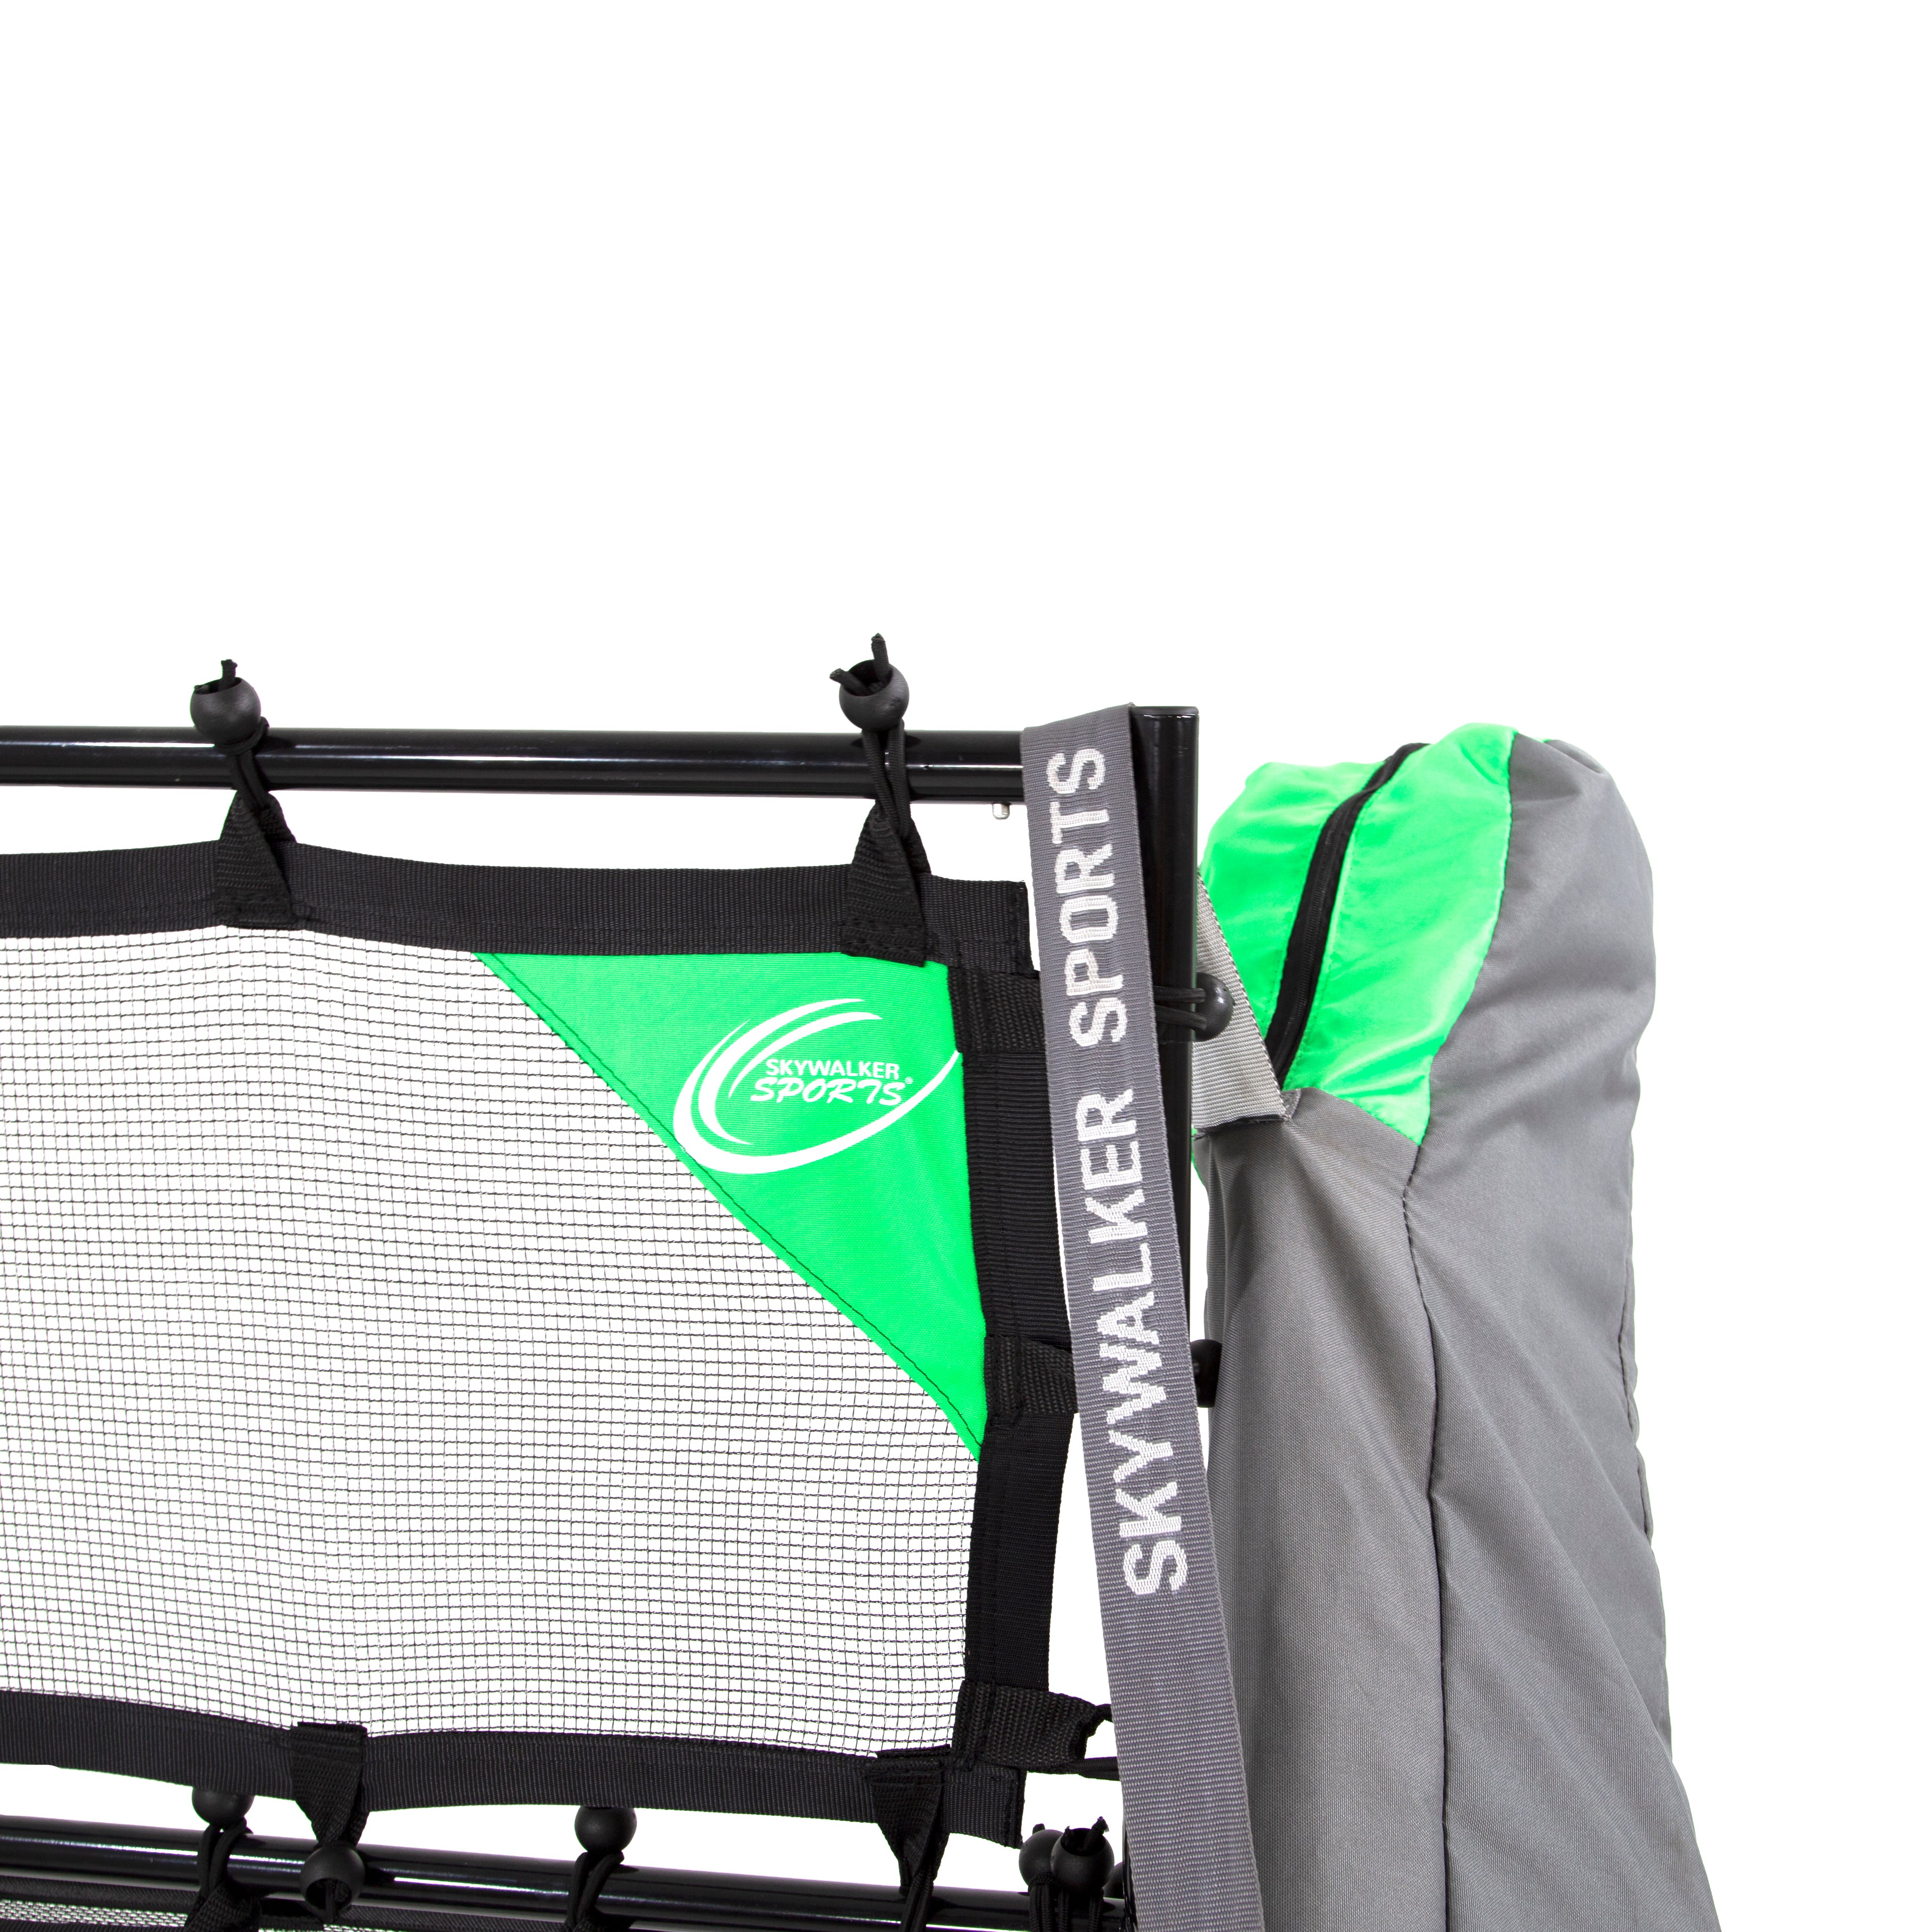 Close-up view of the carrying case hung on the edge of the rebounder's frame.